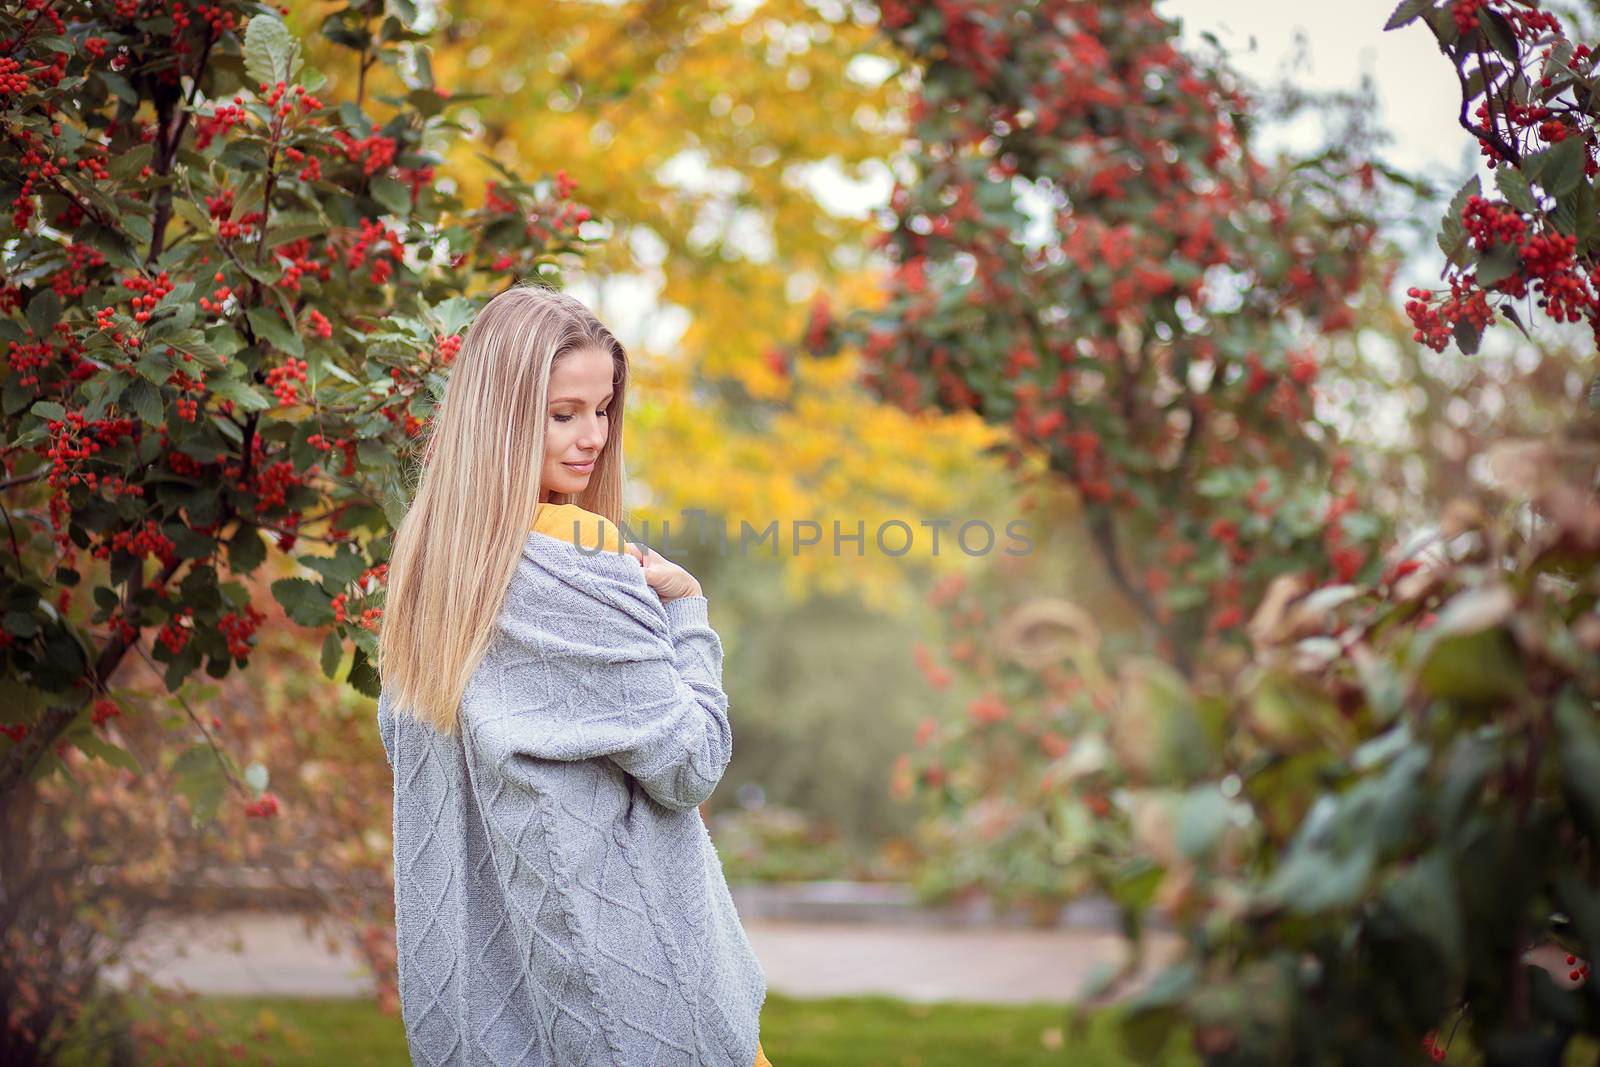 Blonde girl in a gray cardigan and a yellow dress among the autumn trees with red berries. Autumn theme